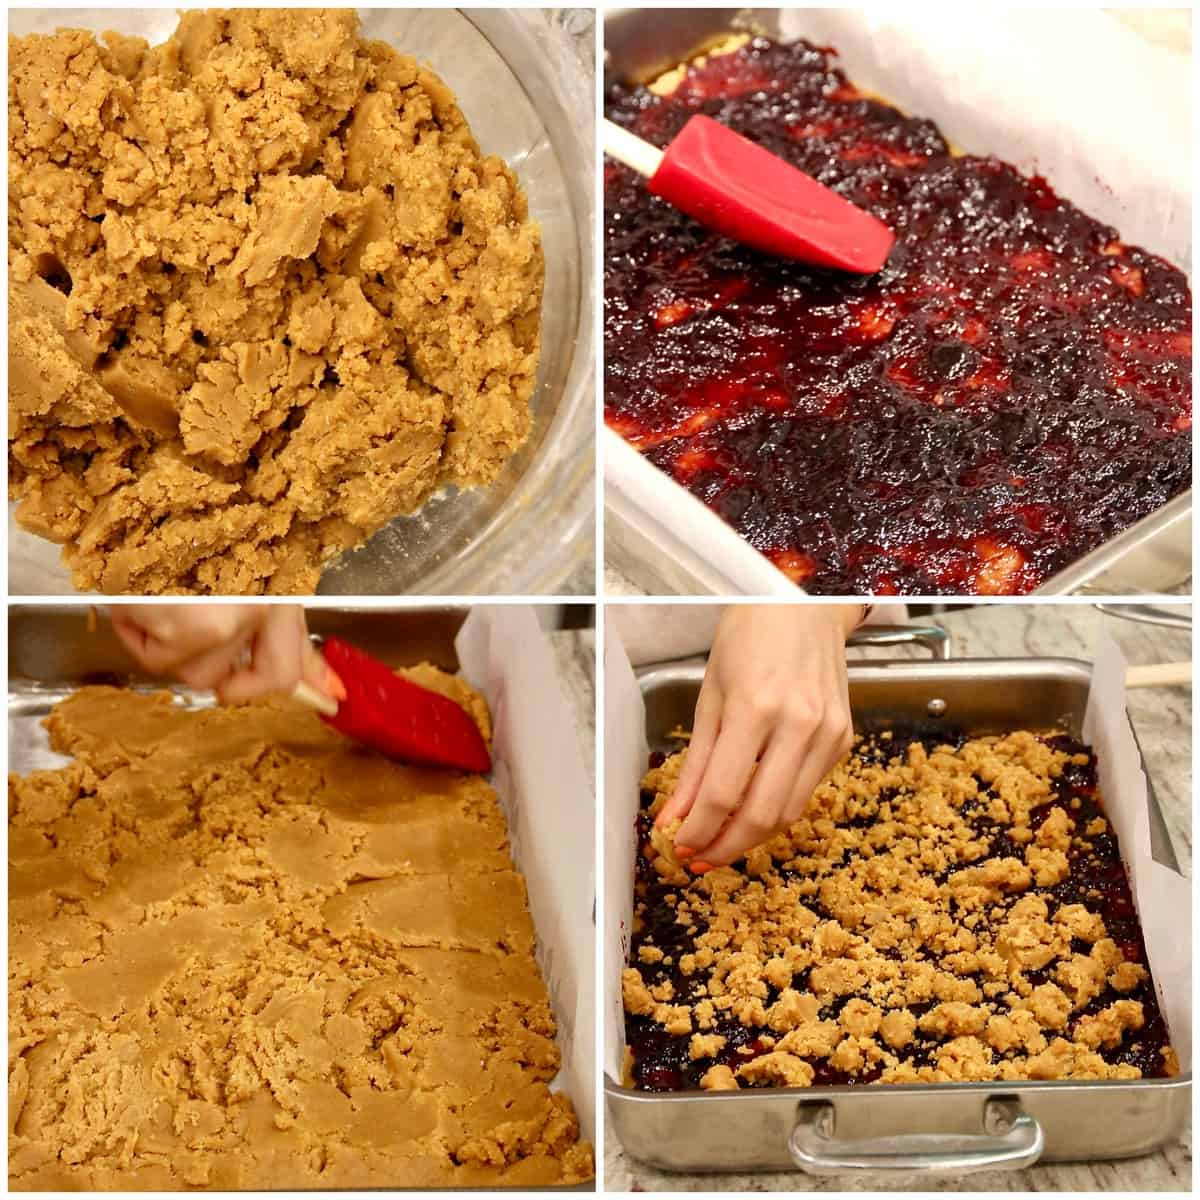 Peanut Butter and Jelly Bars with honey & chocolate chips